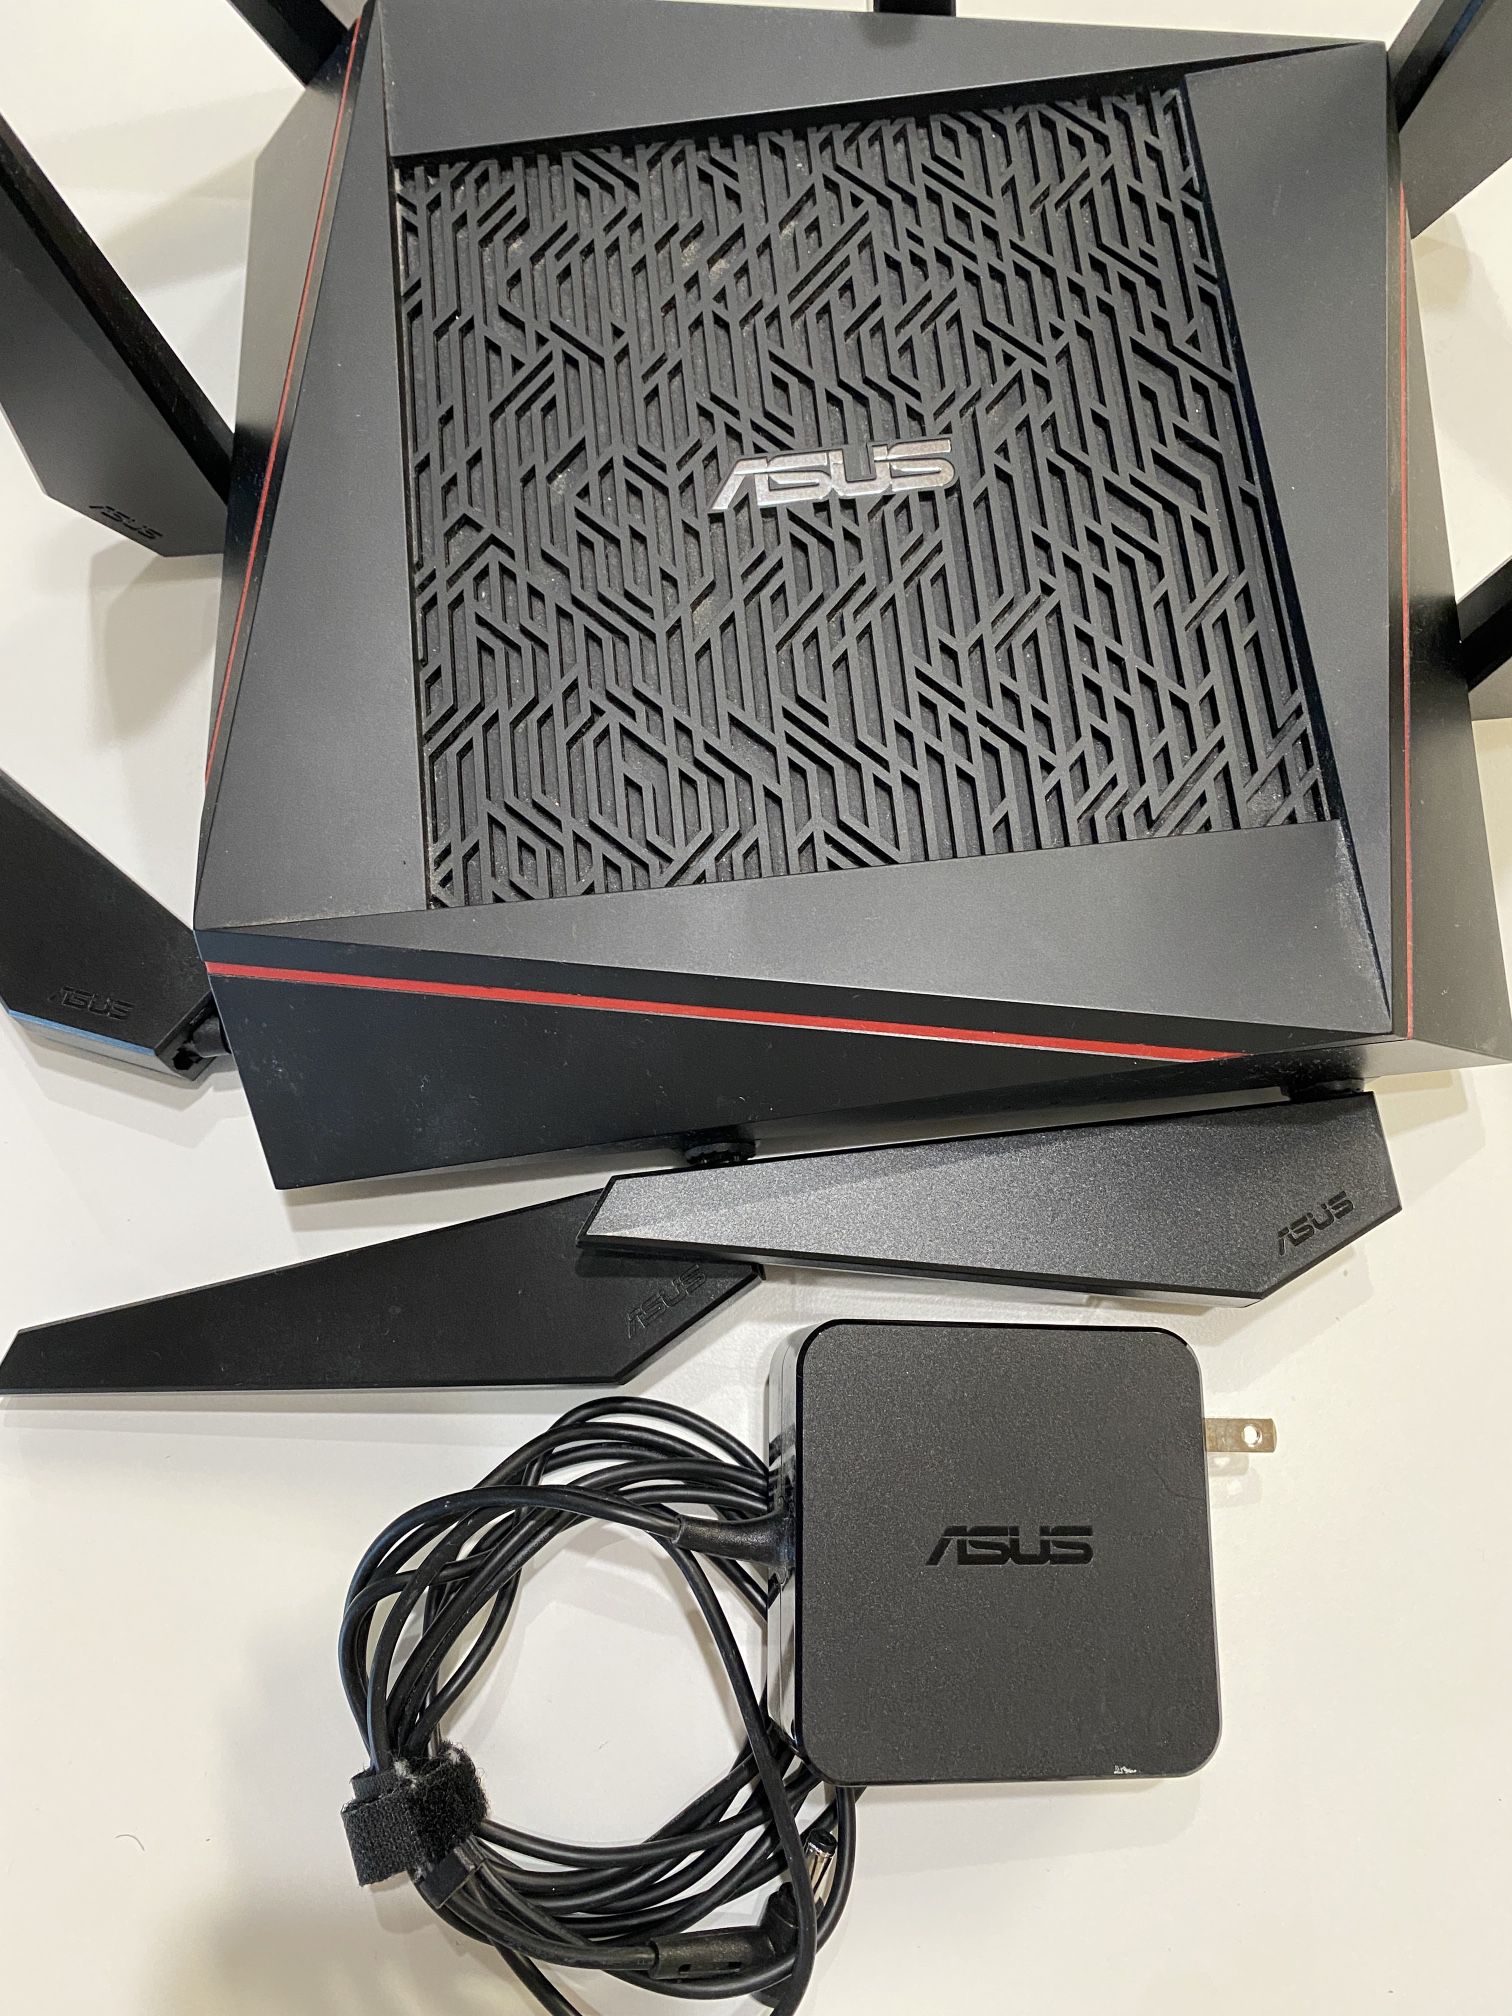 Asus RT-AC5300 gaming router